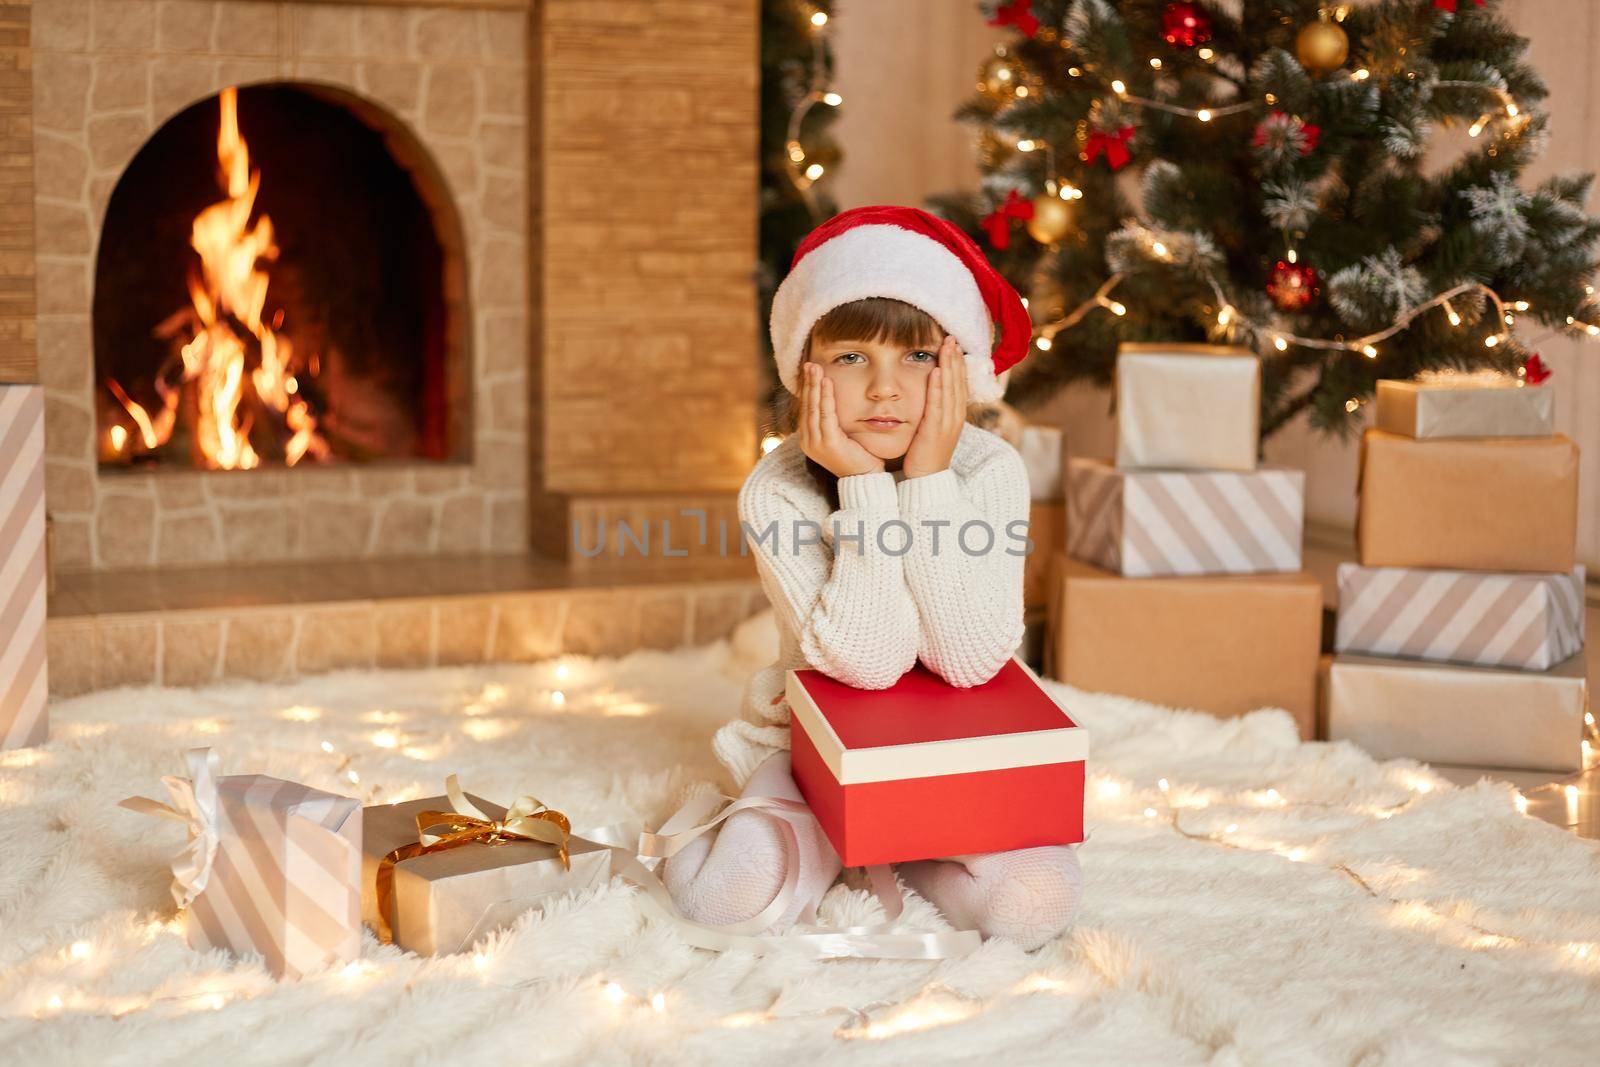 Charming girl sitting on floor with present box, keeping palms on cheeks, looks bored, waiting for opening gifts, posing with xmas tree and fireplace on background, wears santa hat.